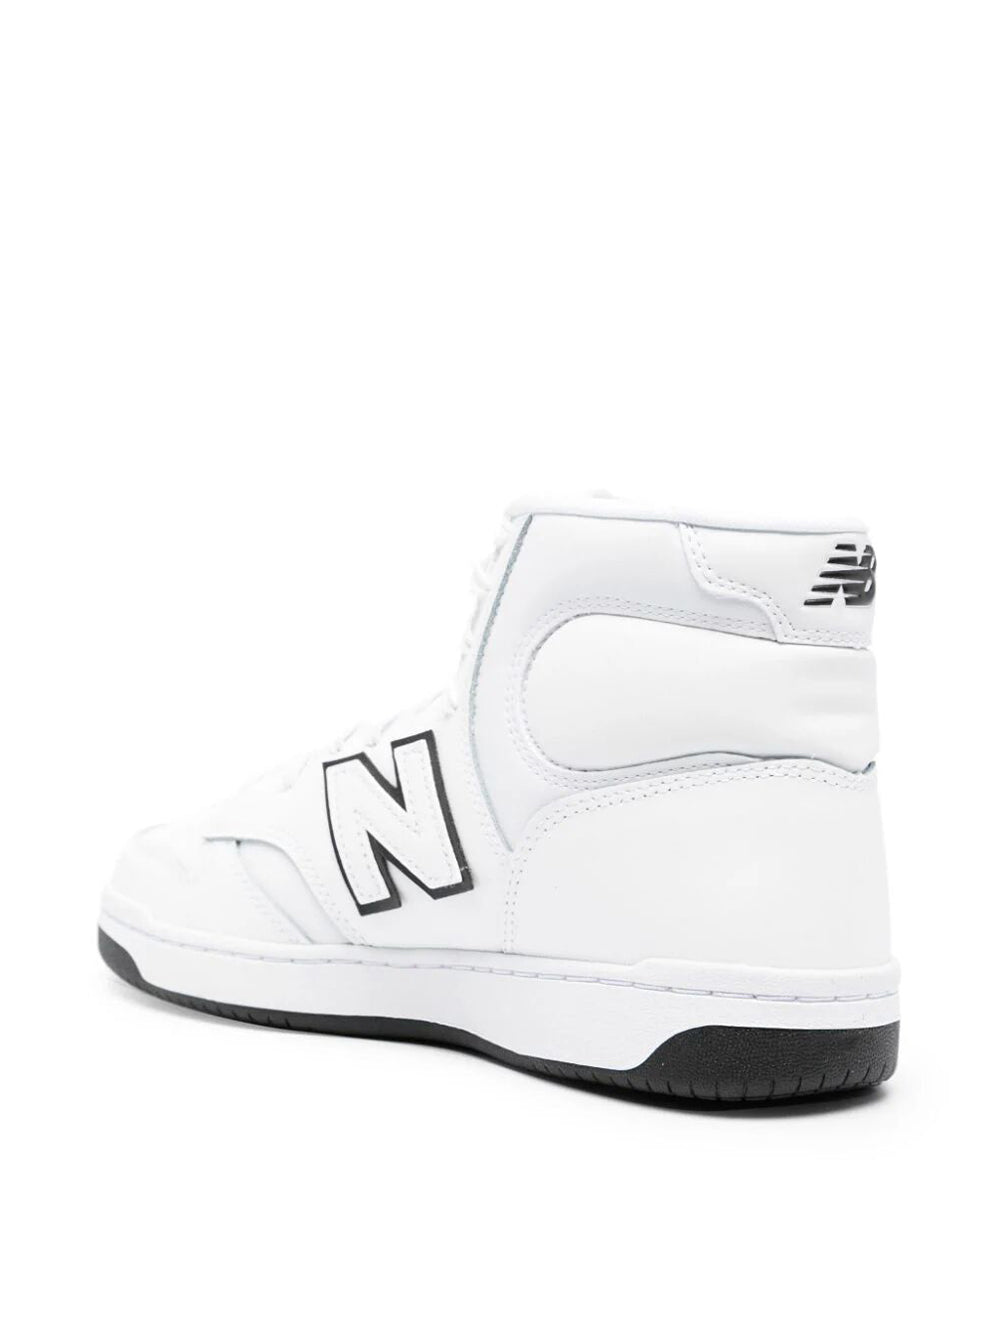 New Balance 480H High-top Sneakers - White